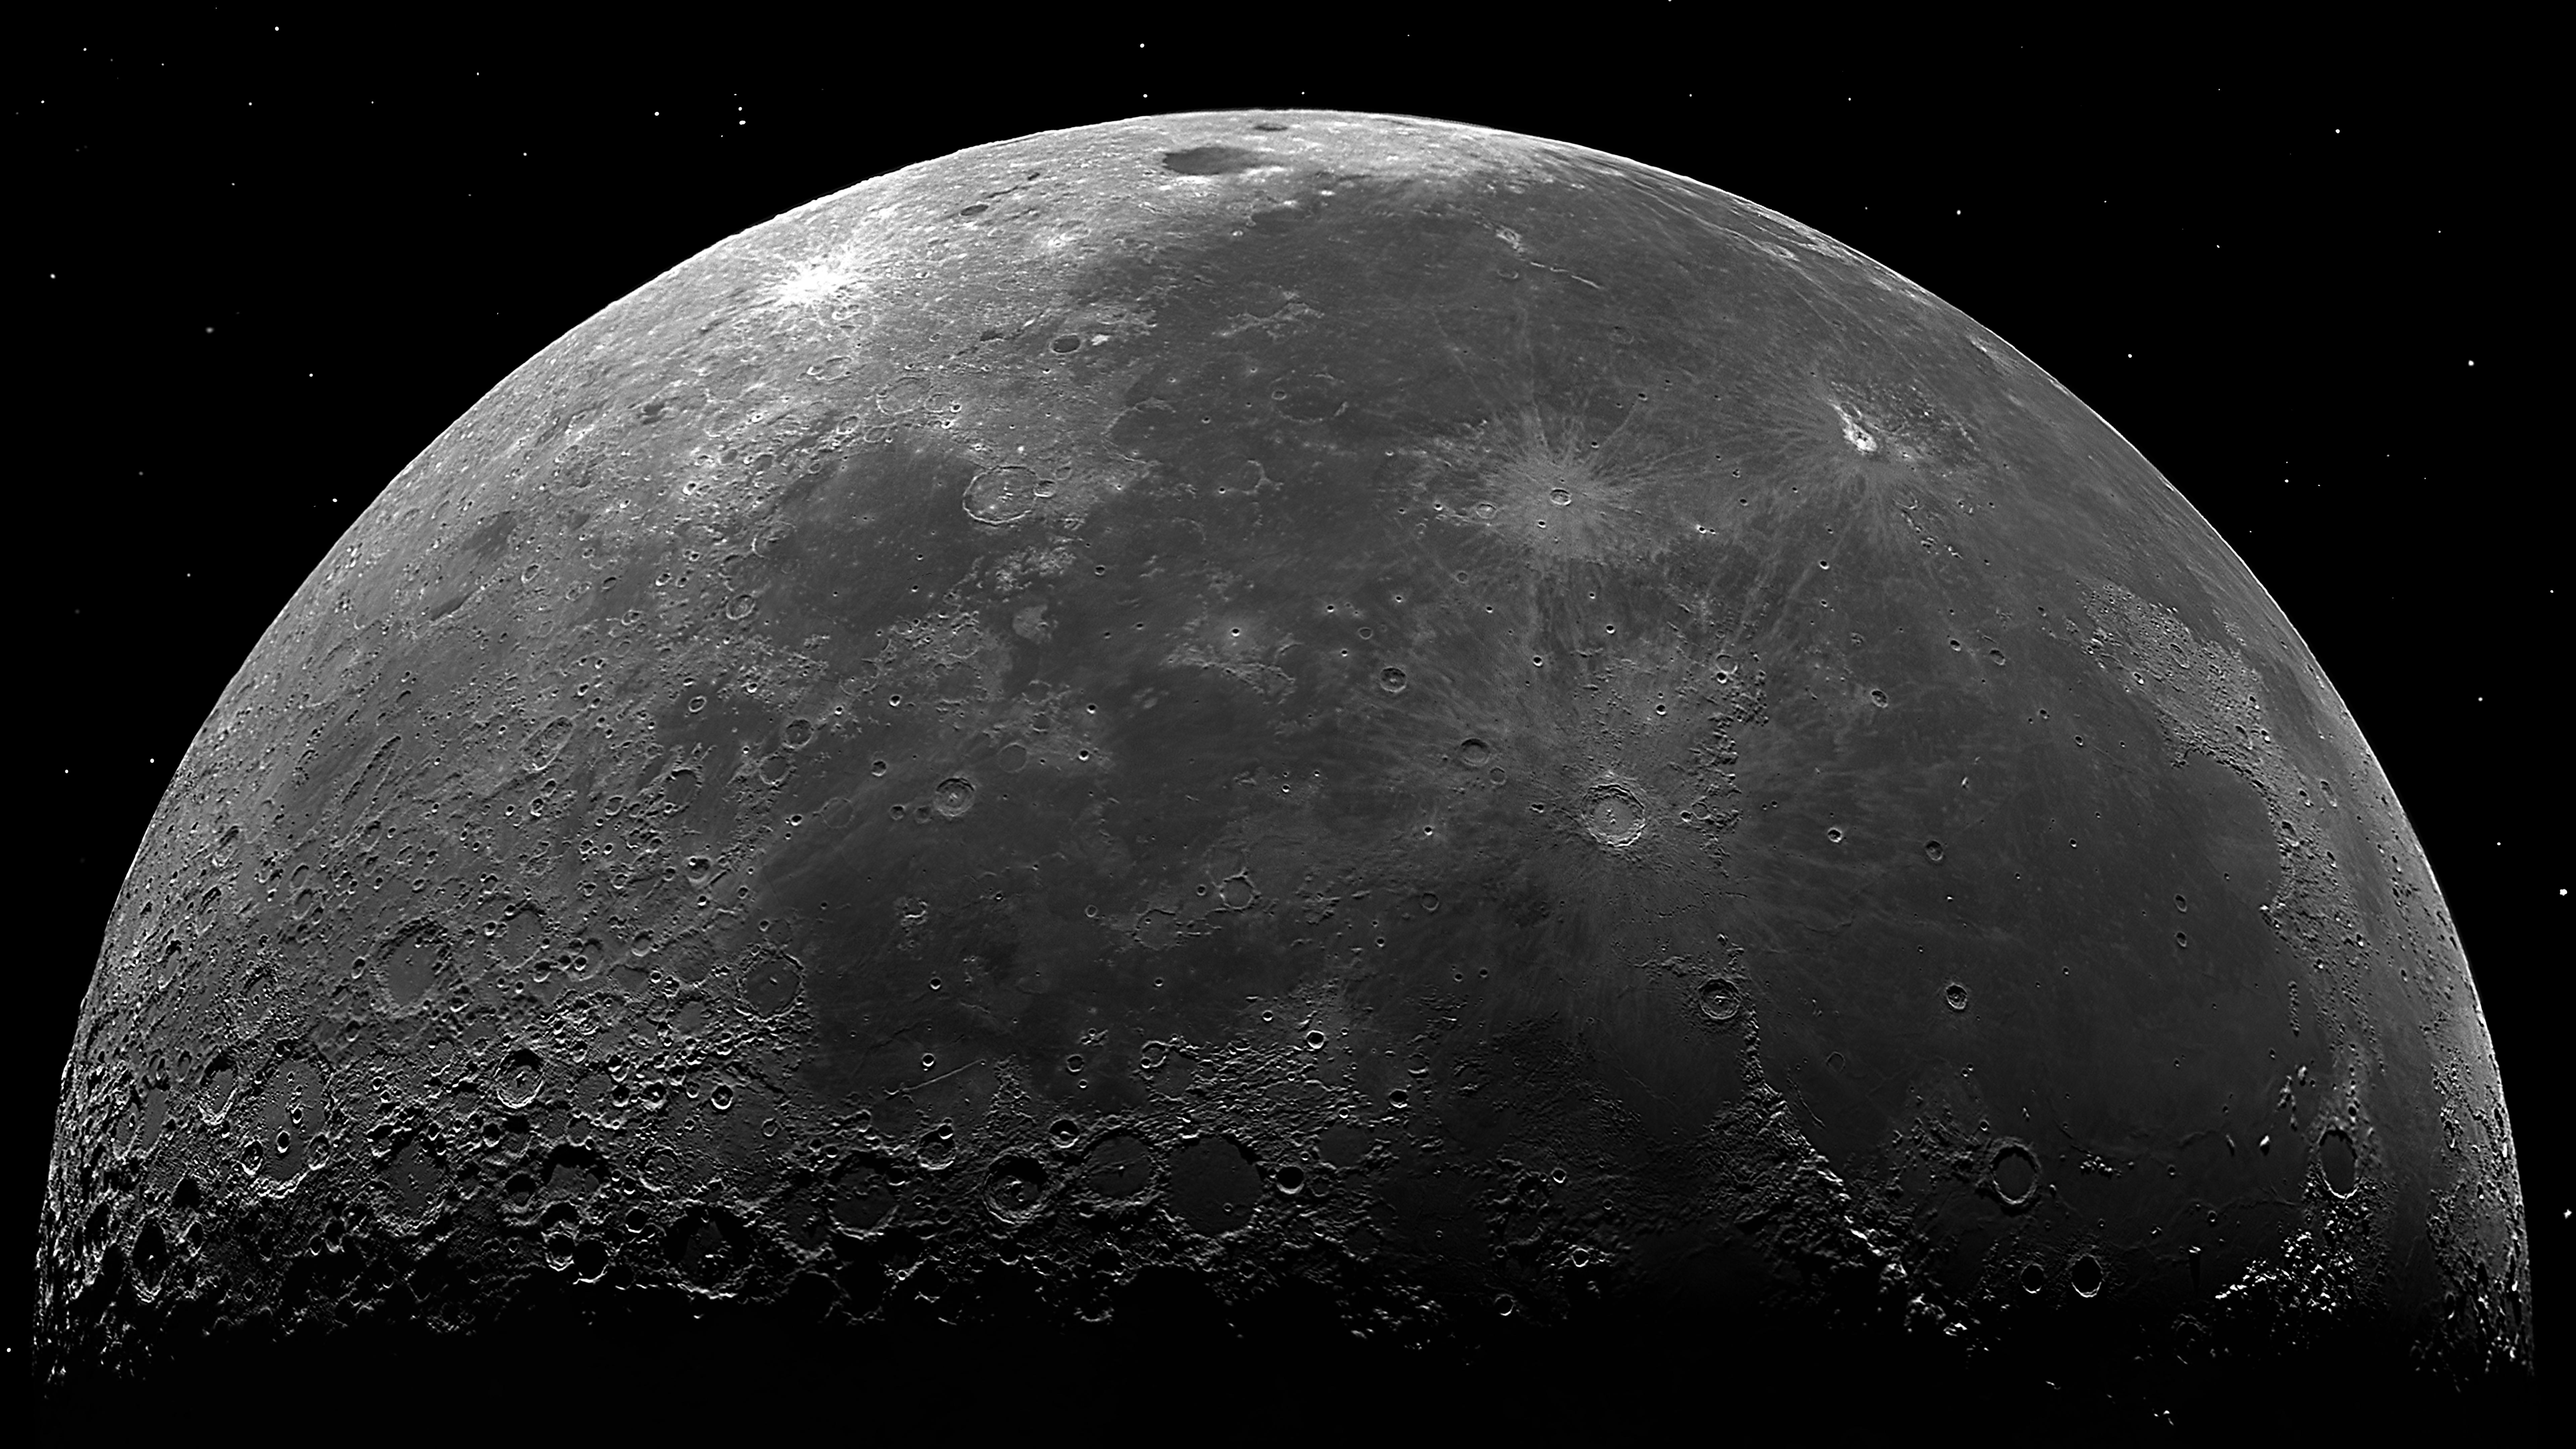 An 8k image of our Moon. Uncompressed and vertical orientation